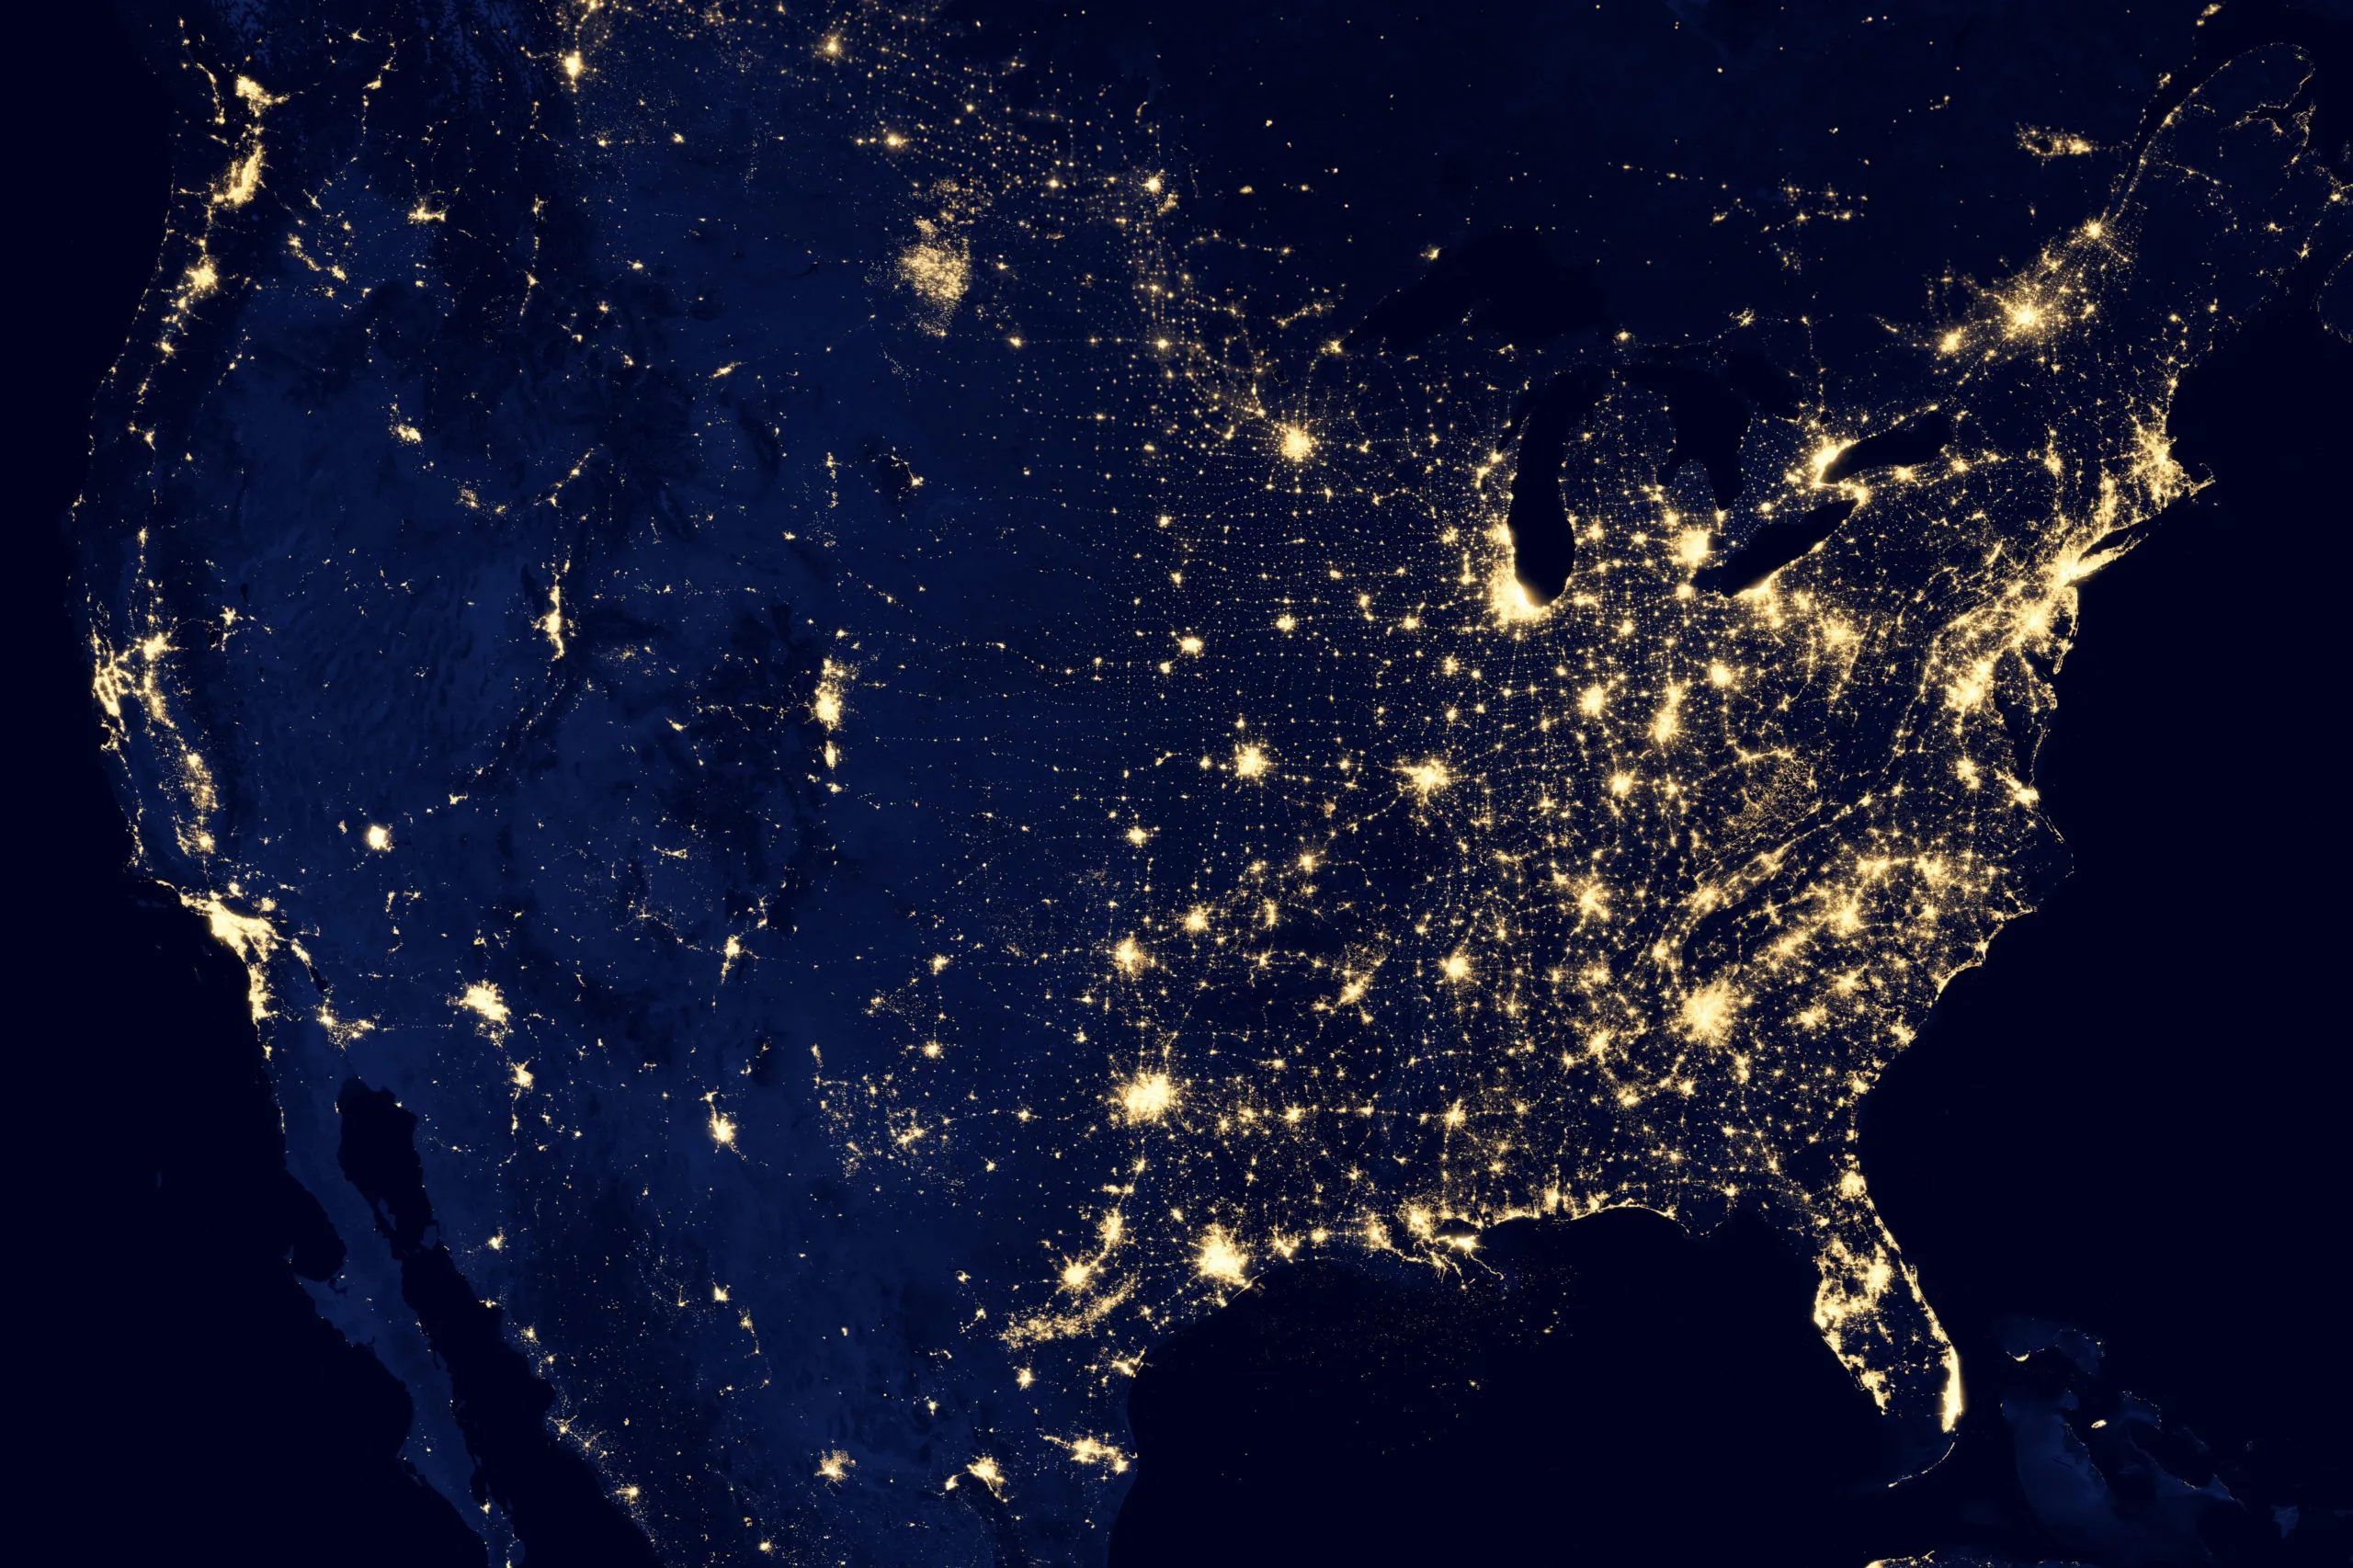 America at night photo from space